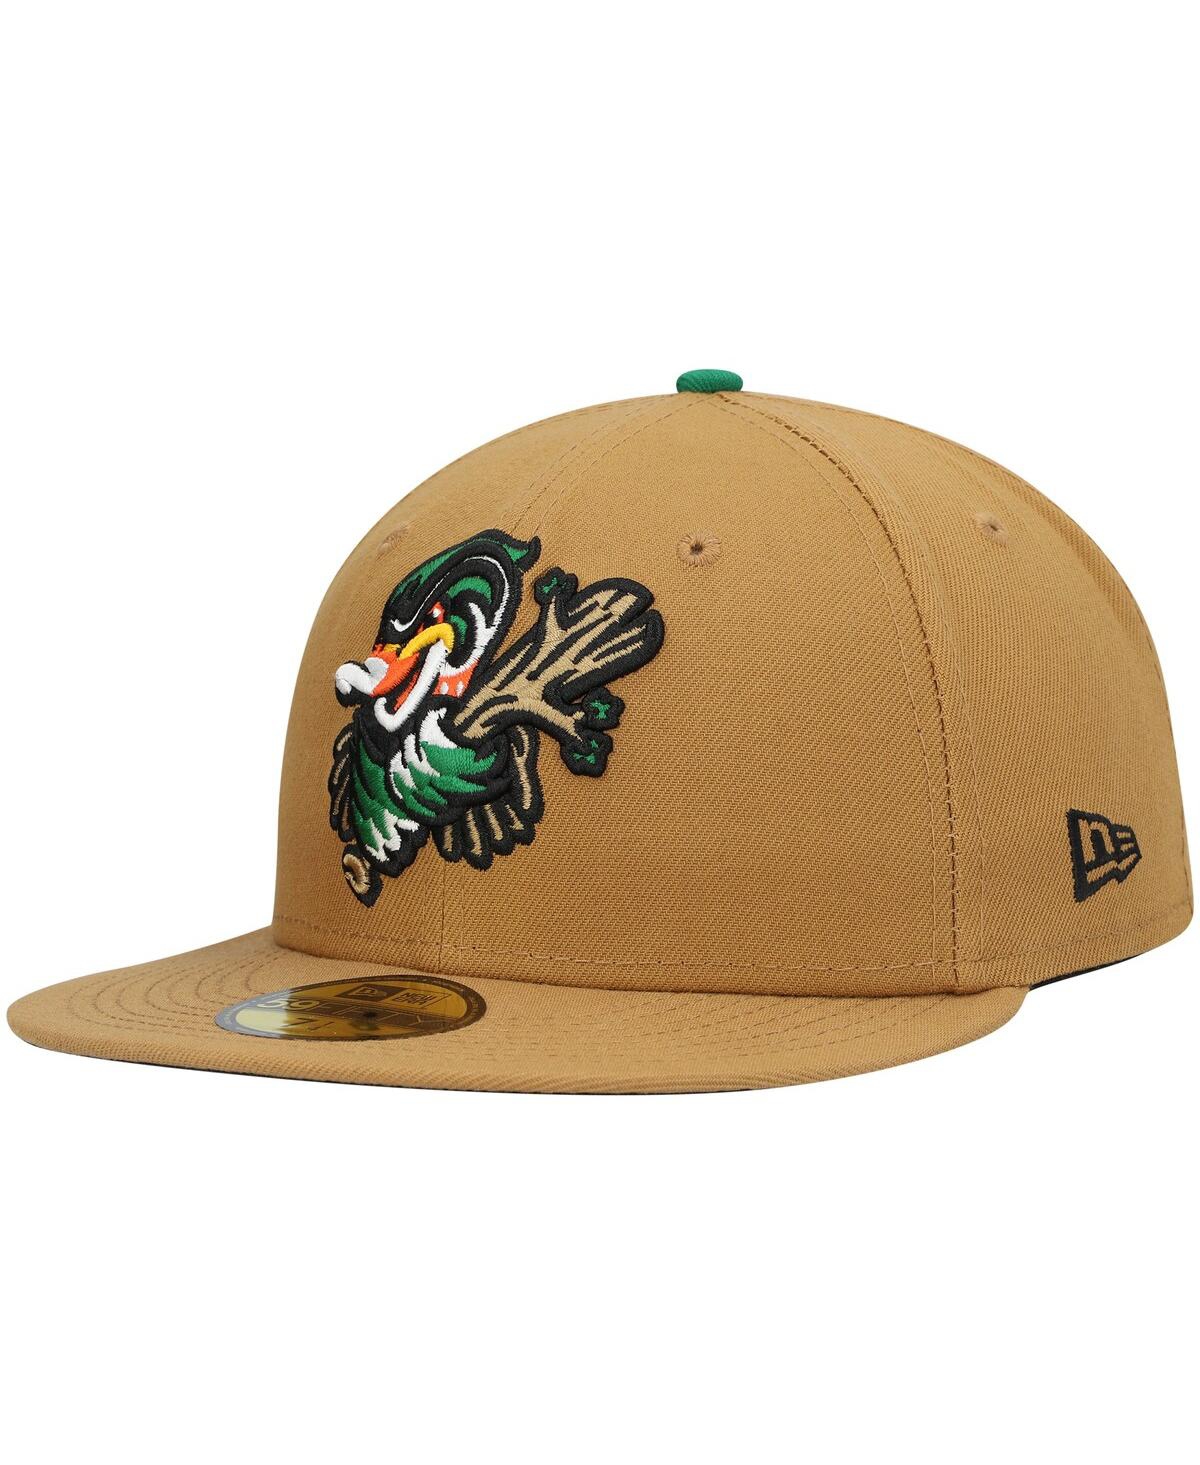 Men's New Era Natural Down East Wood Ducks Authentic Collection Team Alternate 59FIFTY Fitted Hat - Natural